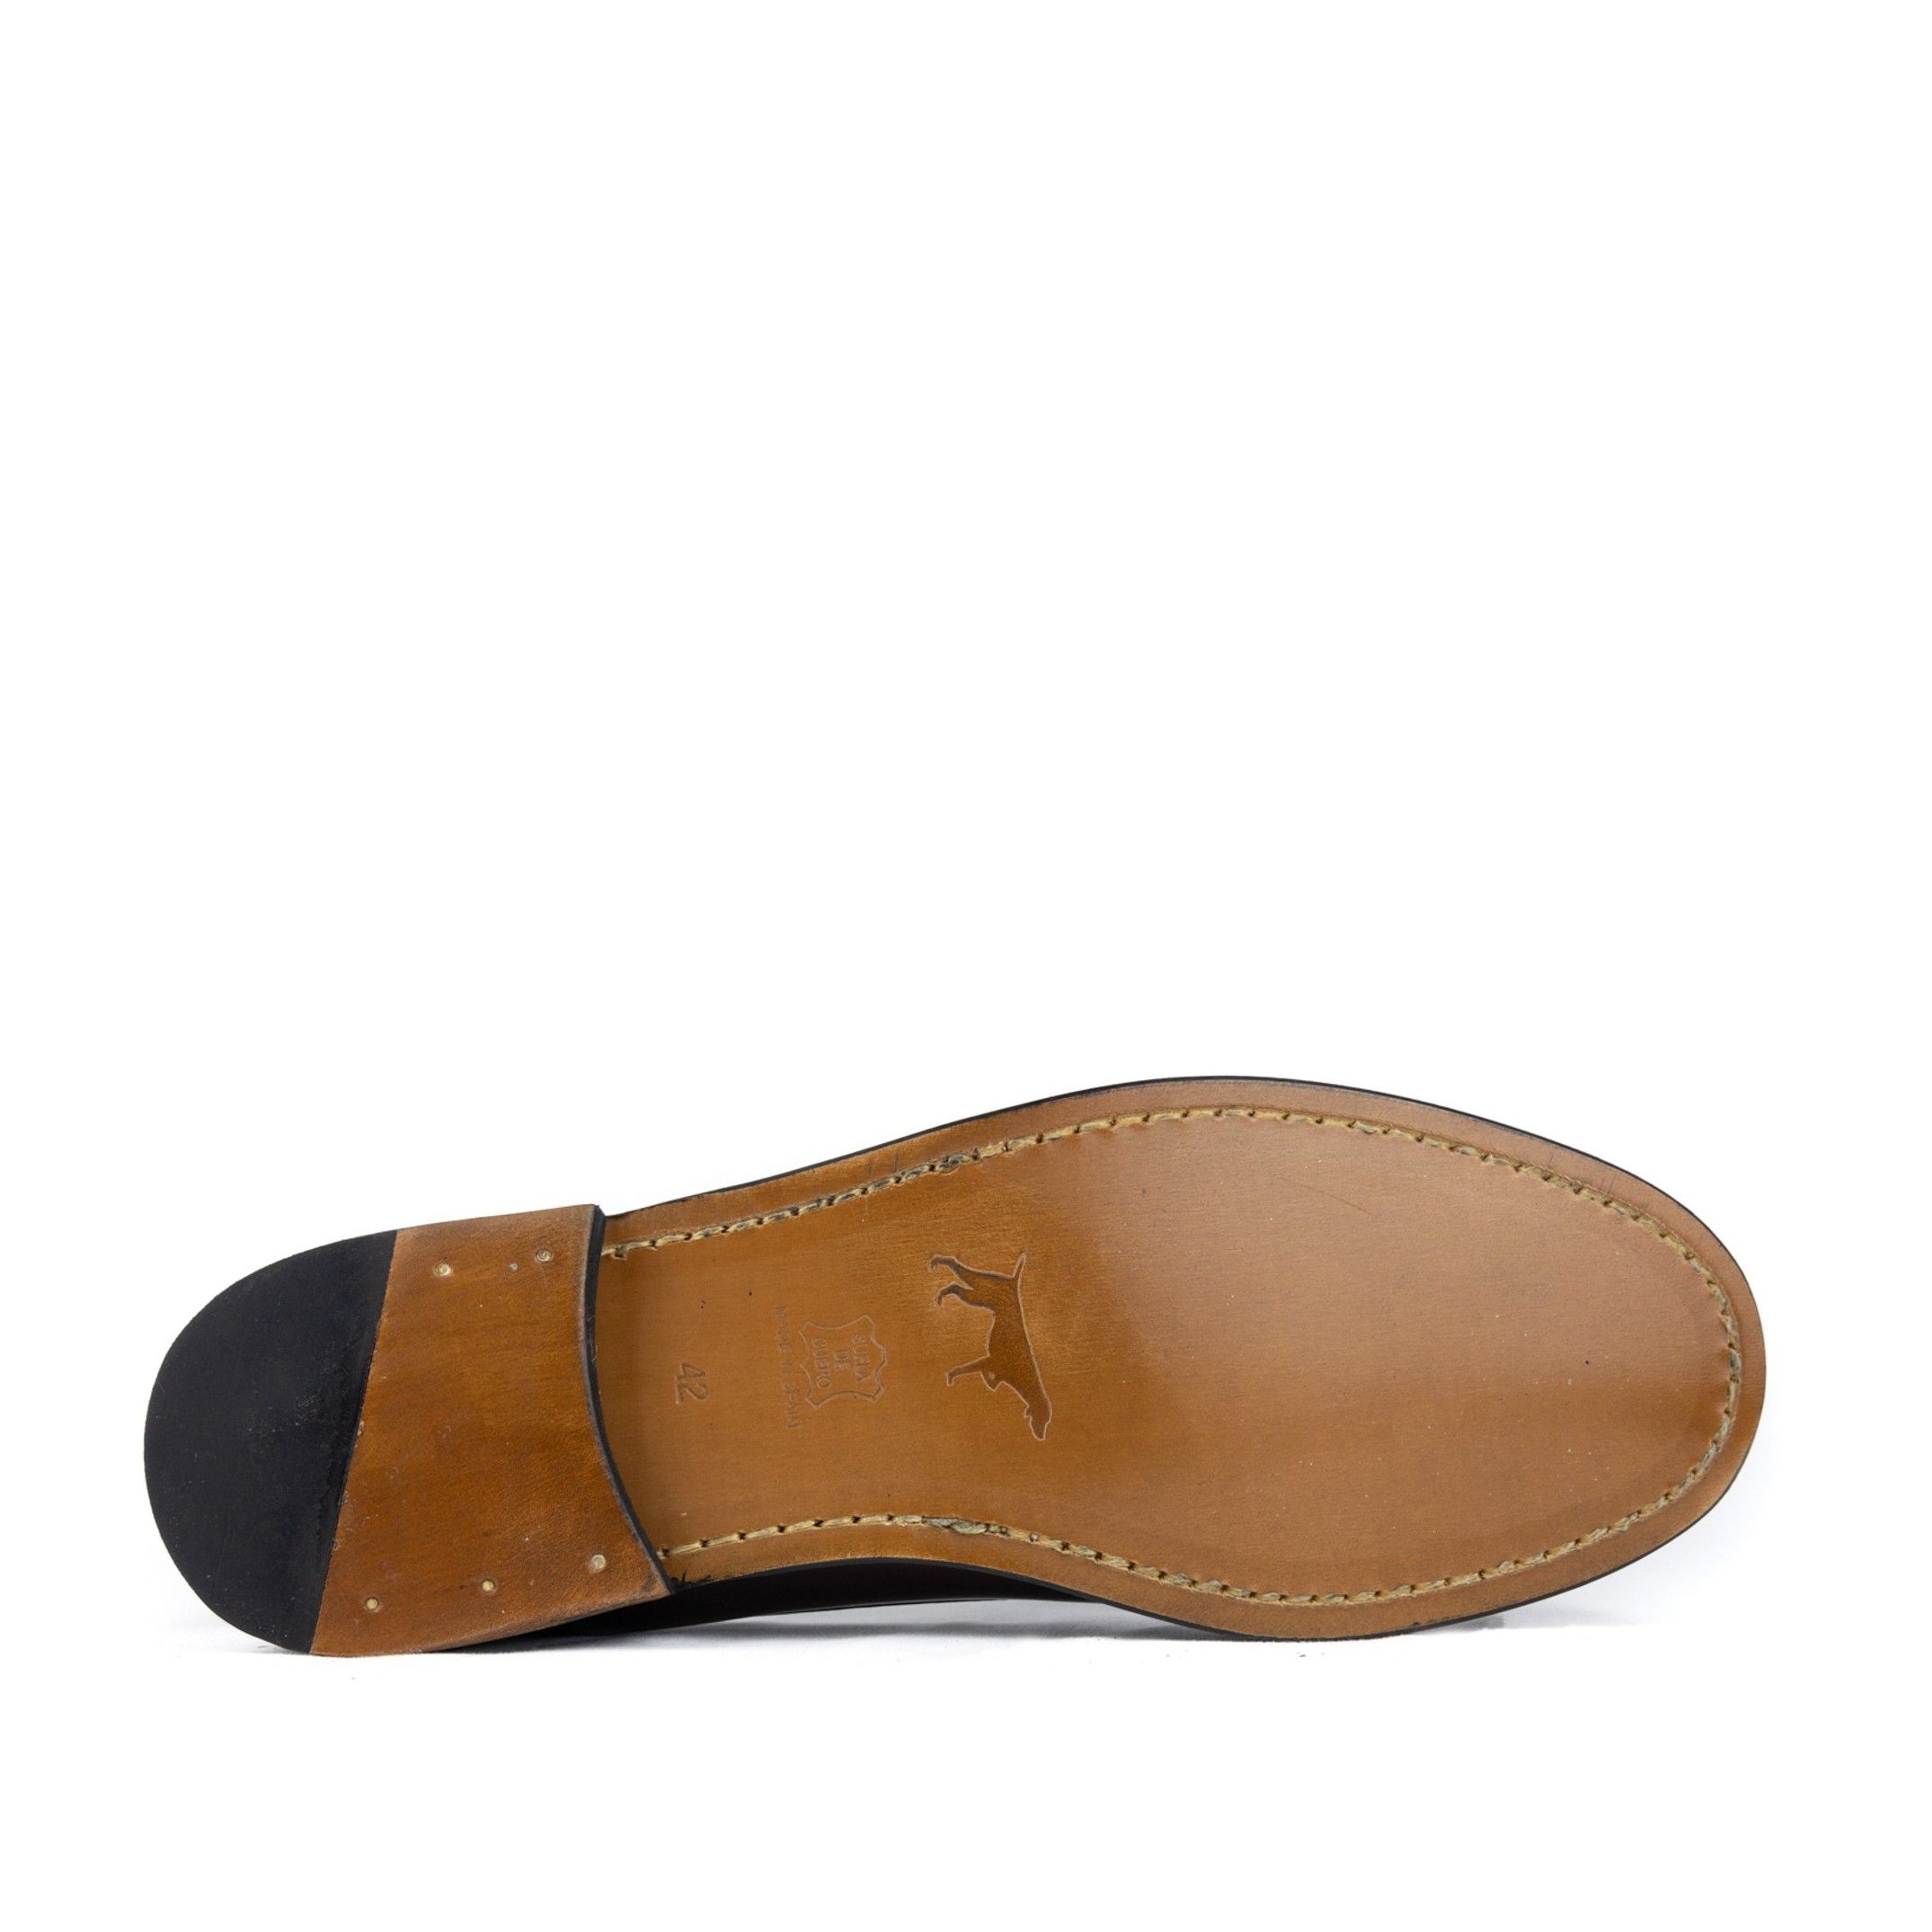 Florentic leather loafers. Premium collection of Son Castellanisimos. Outer material: cowhide leather. Inner: Cowhide leather. Closure: no closure / open. Inner lining and insole: cowhide leather. Outsole Material: high quality leather. Heel height: 2 cm. Designed and manufactured in Spain.